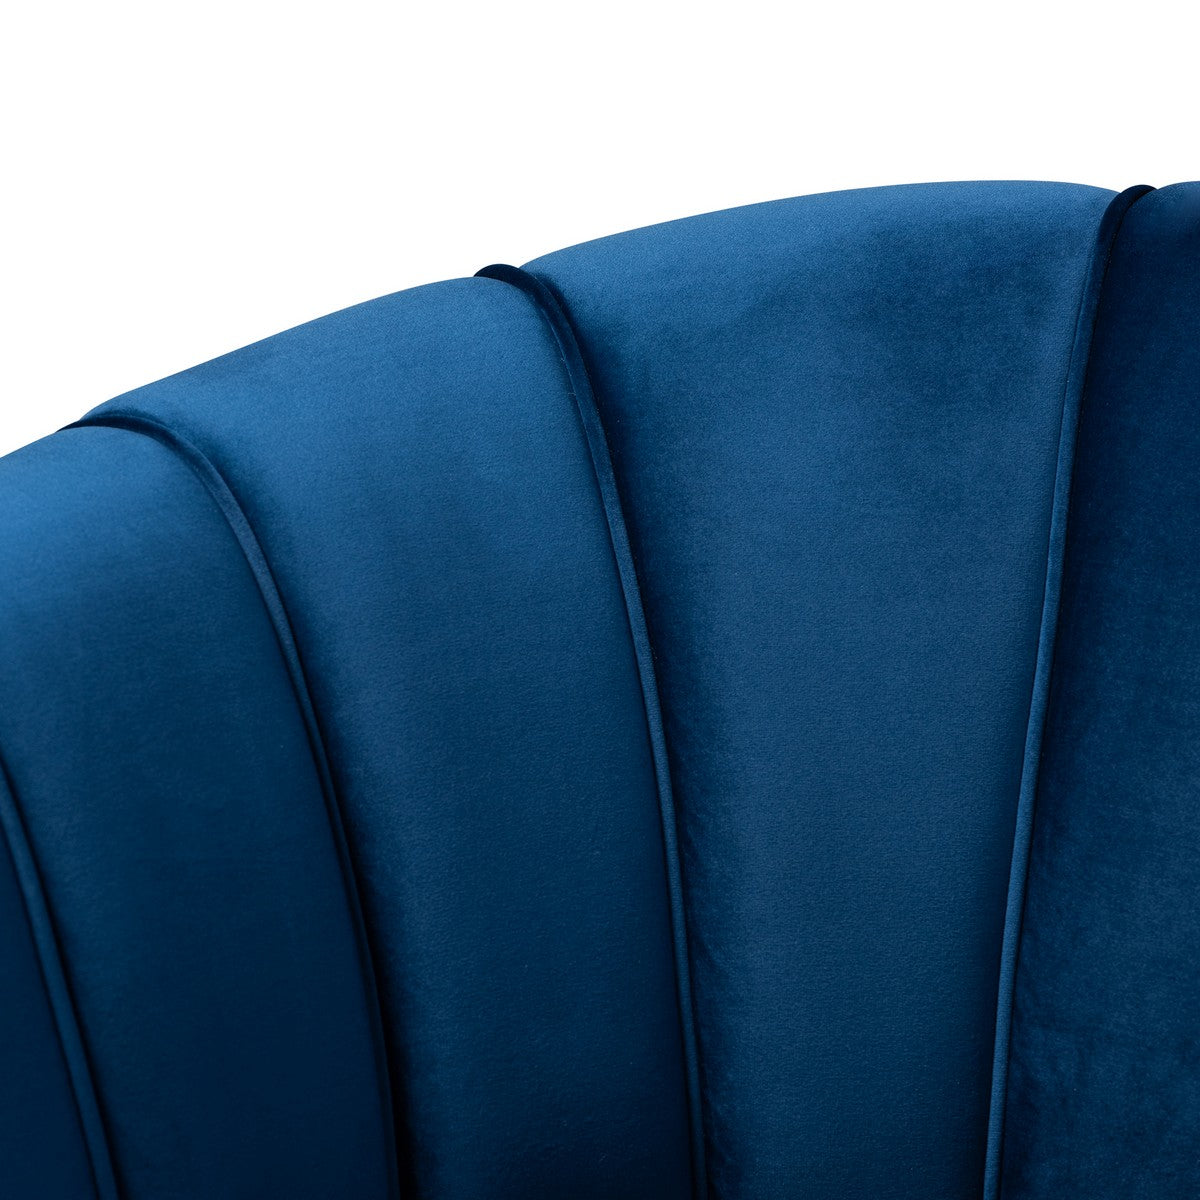 Baxton Studio Emeline Glam and Luxe Navy Blue Velvet Fabric Upholstered Brushed Gold Finished Accent Chair